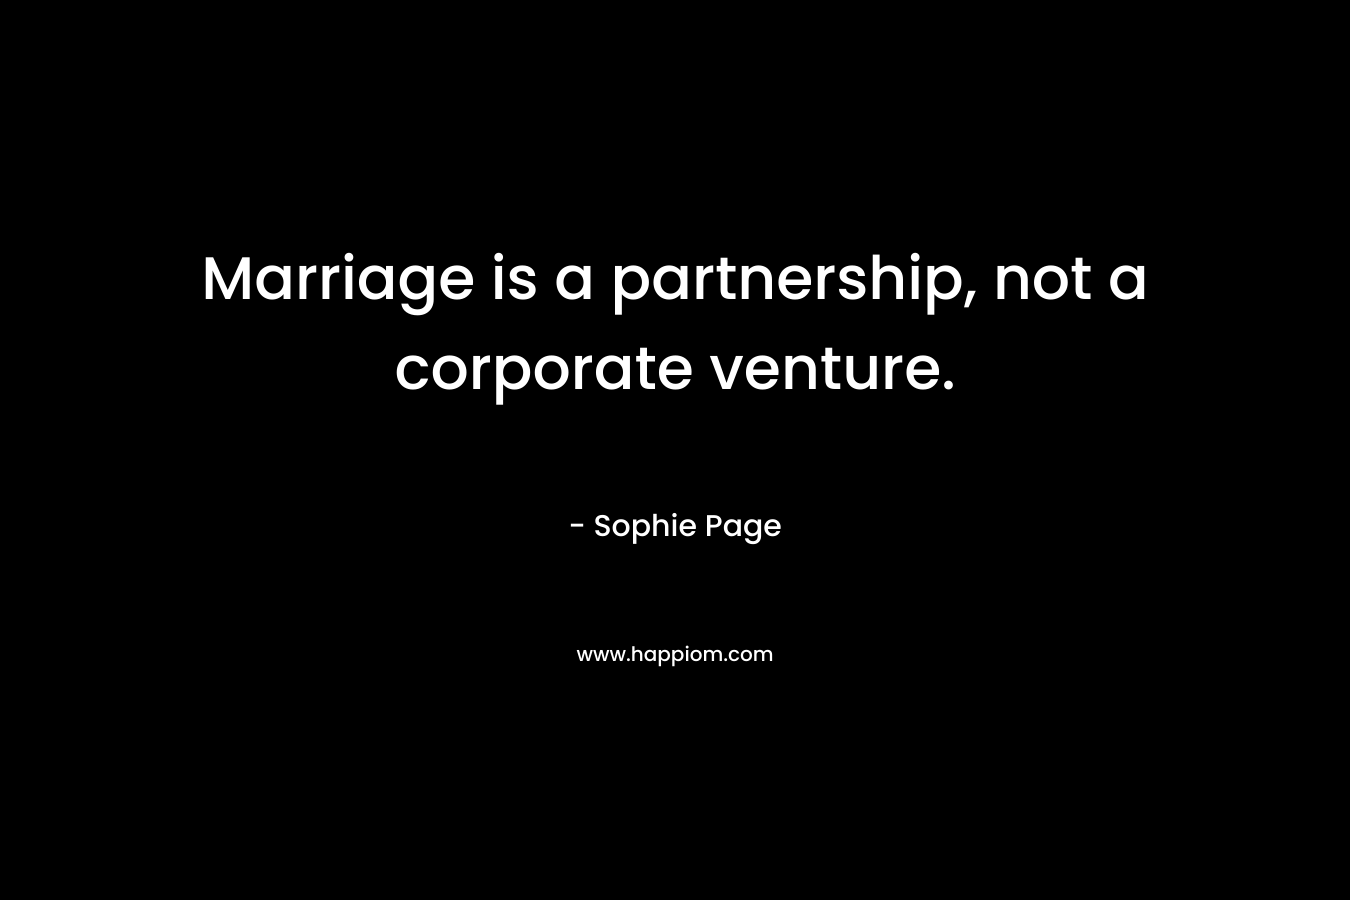 Marriage is a partnership, not a corporate venture. – Sophie Page